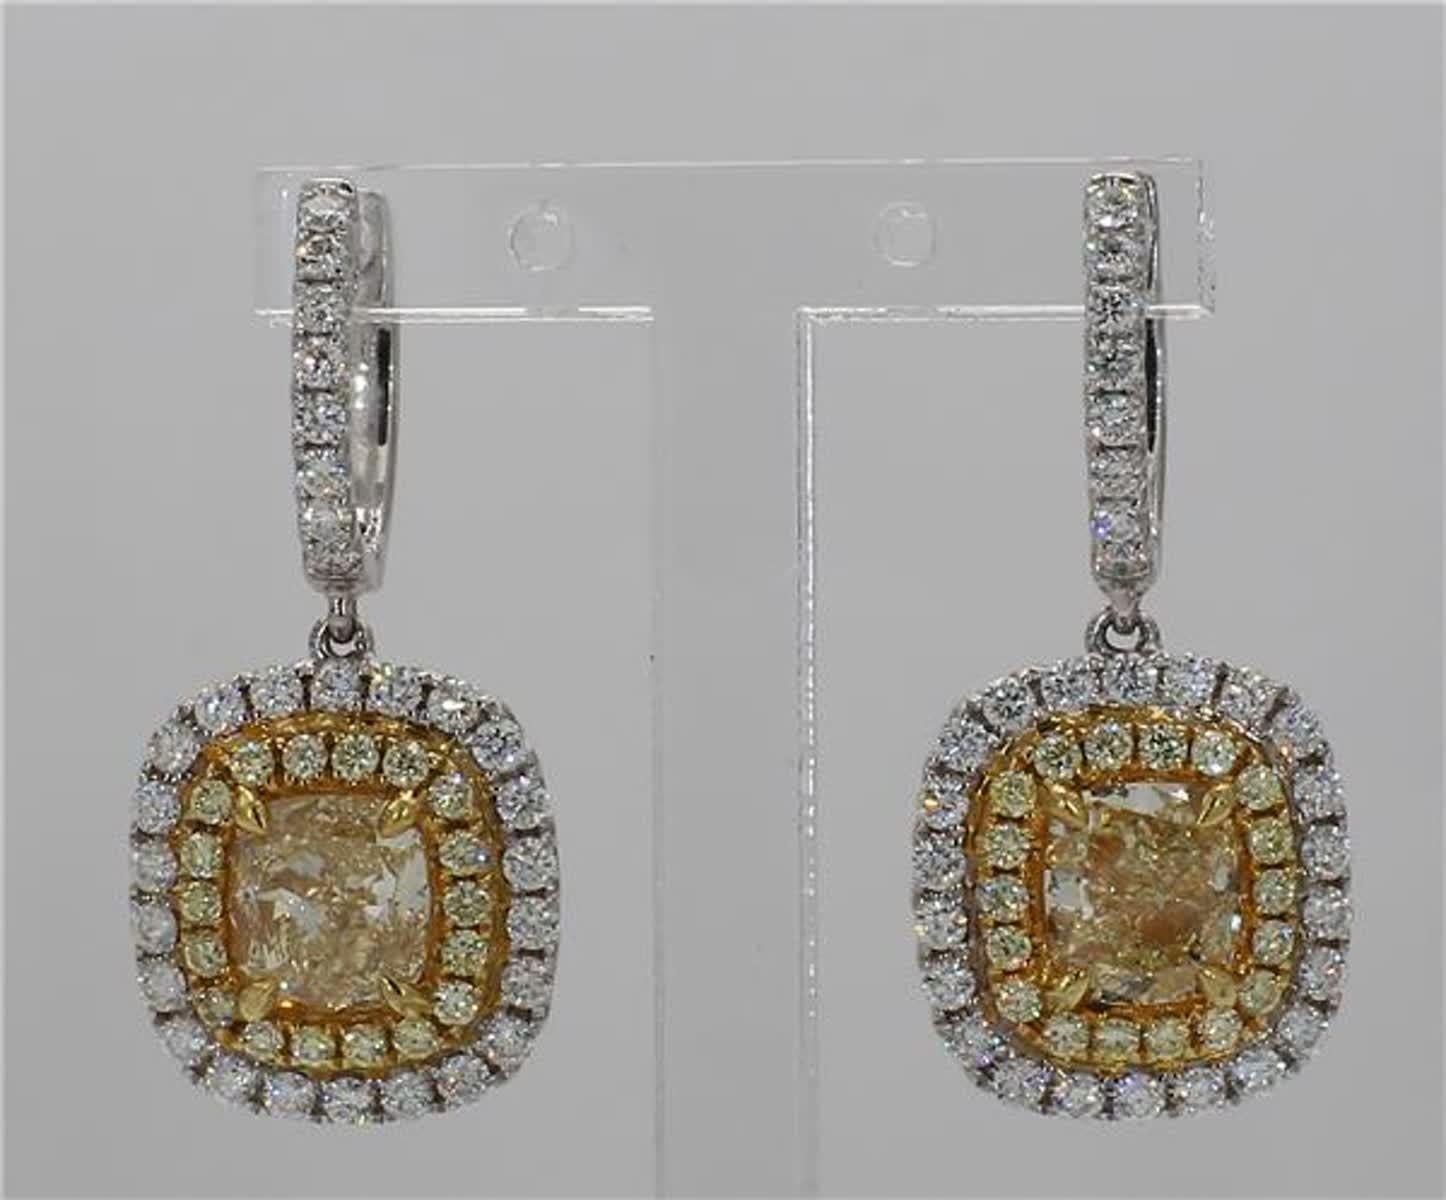 RareGemWorld's classic natural cushion cut yellow diamond earrings. Mounted in a beautiful 18K Yellow and White Gold setting with natural cushion cut yellow diamonds. The yellow diamonds are surrounded by small round natural white diamond and yellow